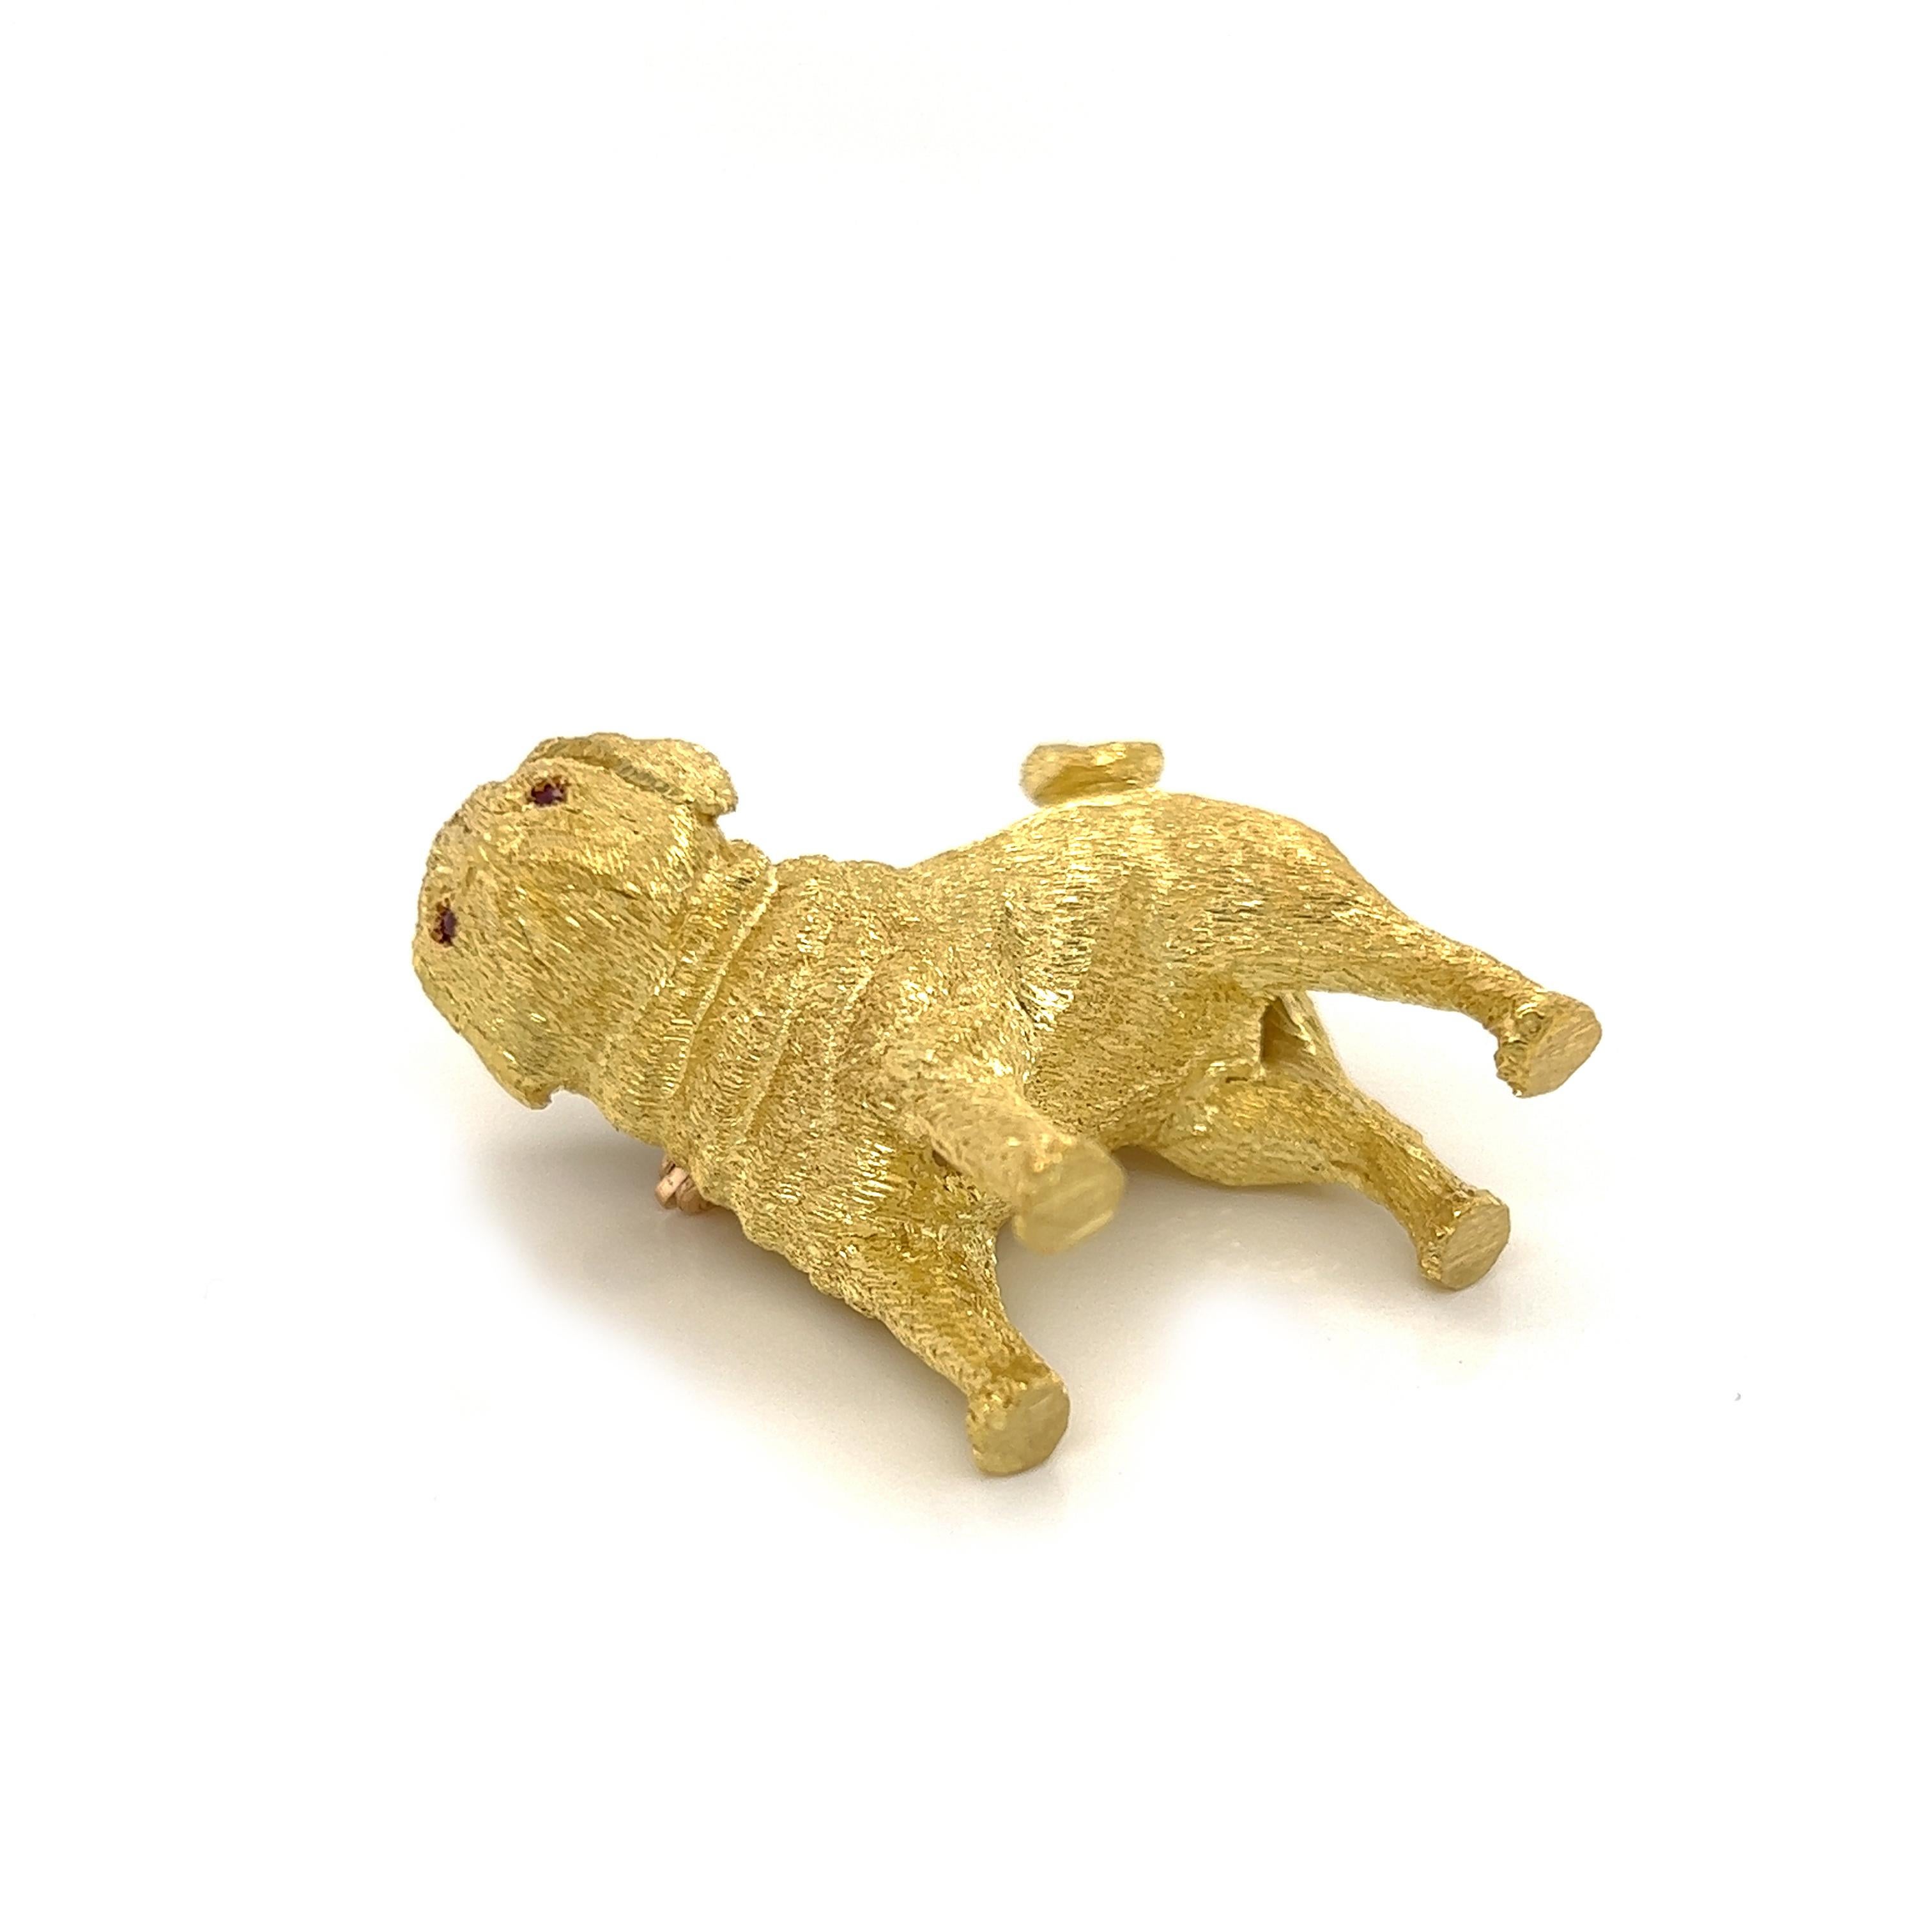 Solid 3D Full Figure Standing Pug Dog 18k Yellow Gold Brooch In Excellent Condition For Sale In Boca Raton, FL